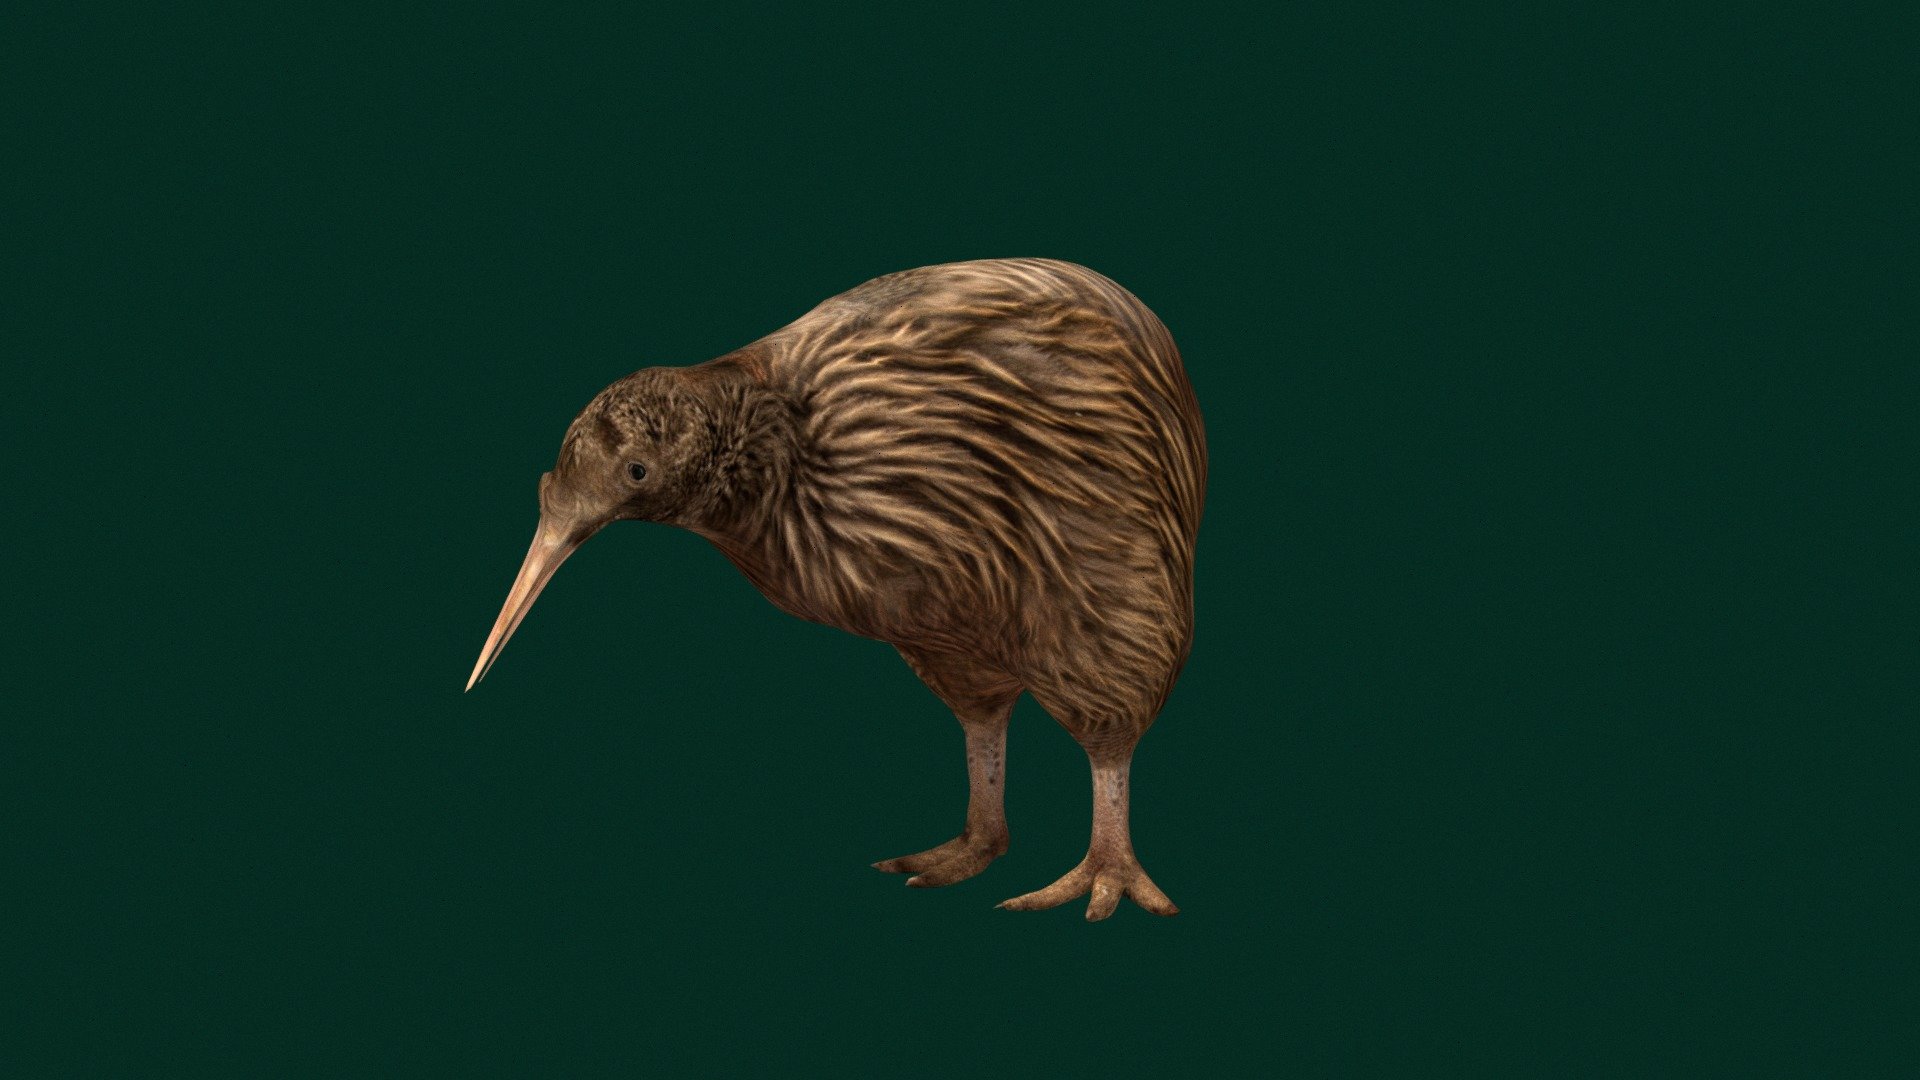 Kiwi Flightless Bird (Smallest Ratites) 

‎Apteryx  ( Birds )

1 Draw Calls

GameReady 

8 Animations

4K PBR Textures Material

Unreal FBX

Unity FBX  

Blend File 

USDZ File (AR Ready). Real Scale Dimension

Textures Files

GLB File

Gltf File ( Spark AR, Lens Studio(SnapChat) , Effector(Tiktok) , Spline, Play Canvas ) Compatible

Triangles : 9182

Vertices  : 4629

Faces     : 4627 

Edges     : 9253

Diffuse , Metallic, Roughness , Normal Map ,Specular Map,AO
 

Kiwi are flightless birds endemic to New Zealand of the order Apterygiformes. The five extant species fall into the family Apterygidae and genus Apteryx. Approximately the size of a domestic chicken, kiwi are the smallest ratites. Wikipedia
Scientific name: Apteryx
Clade: Novaeratitae
Domain: Eukaryota
Family: Apterygidae; Gray, 1840
Kingdom: Animalia
Order: Apterygiformes; Haeckel, 1866
Phylum: Chordata - Kiwi Flightless Bird (LowPoly) - 3D model by Nyilonelycompany 3d model